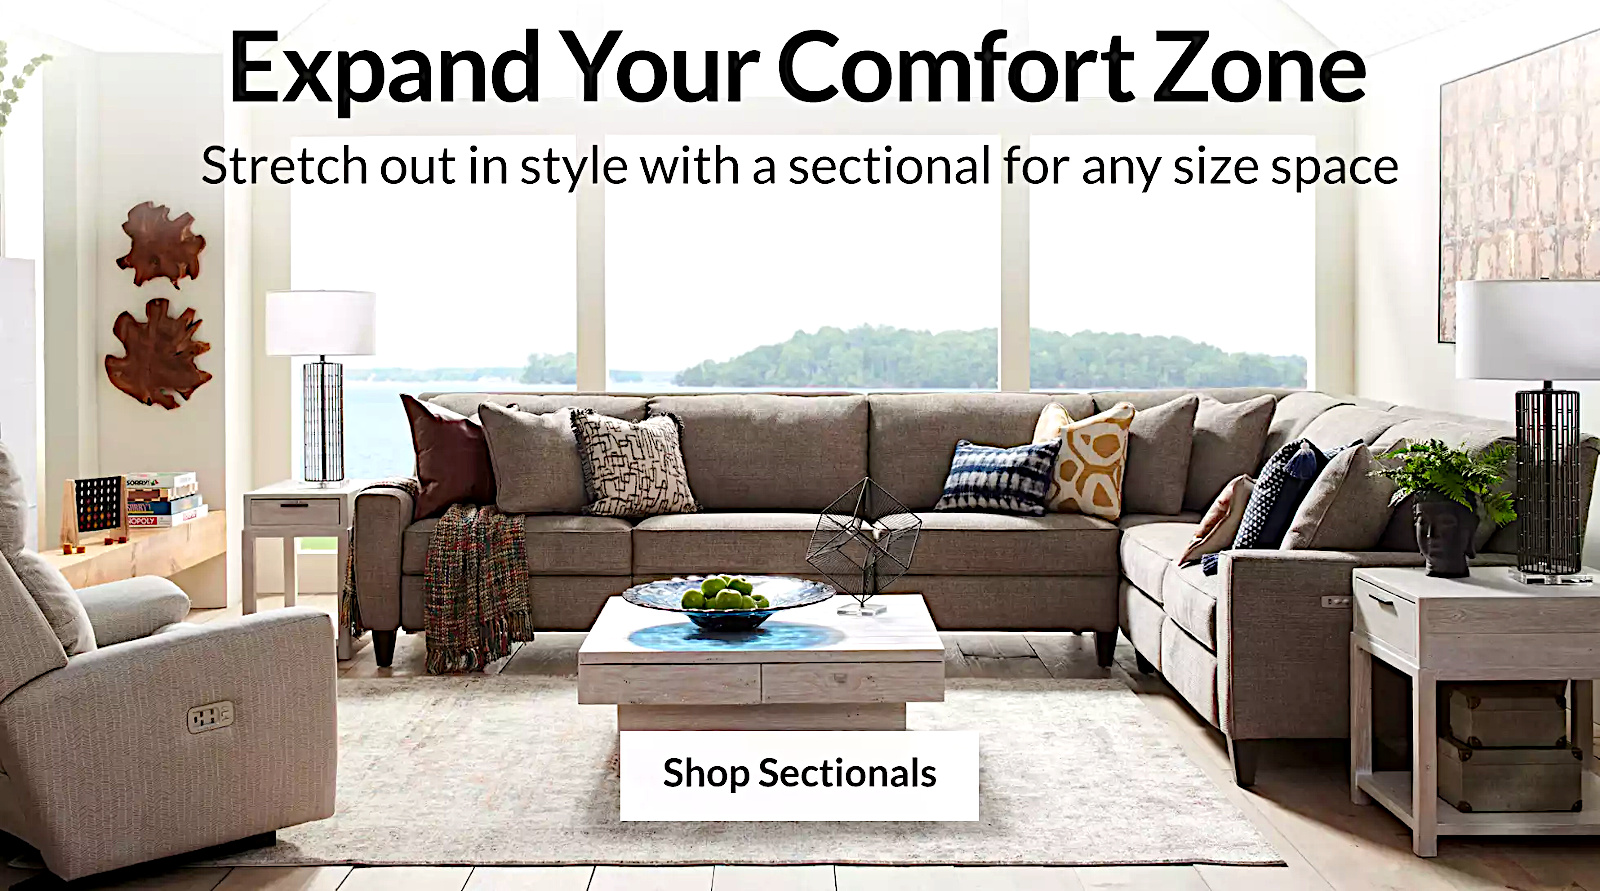 Expand your comfort zone affordable price